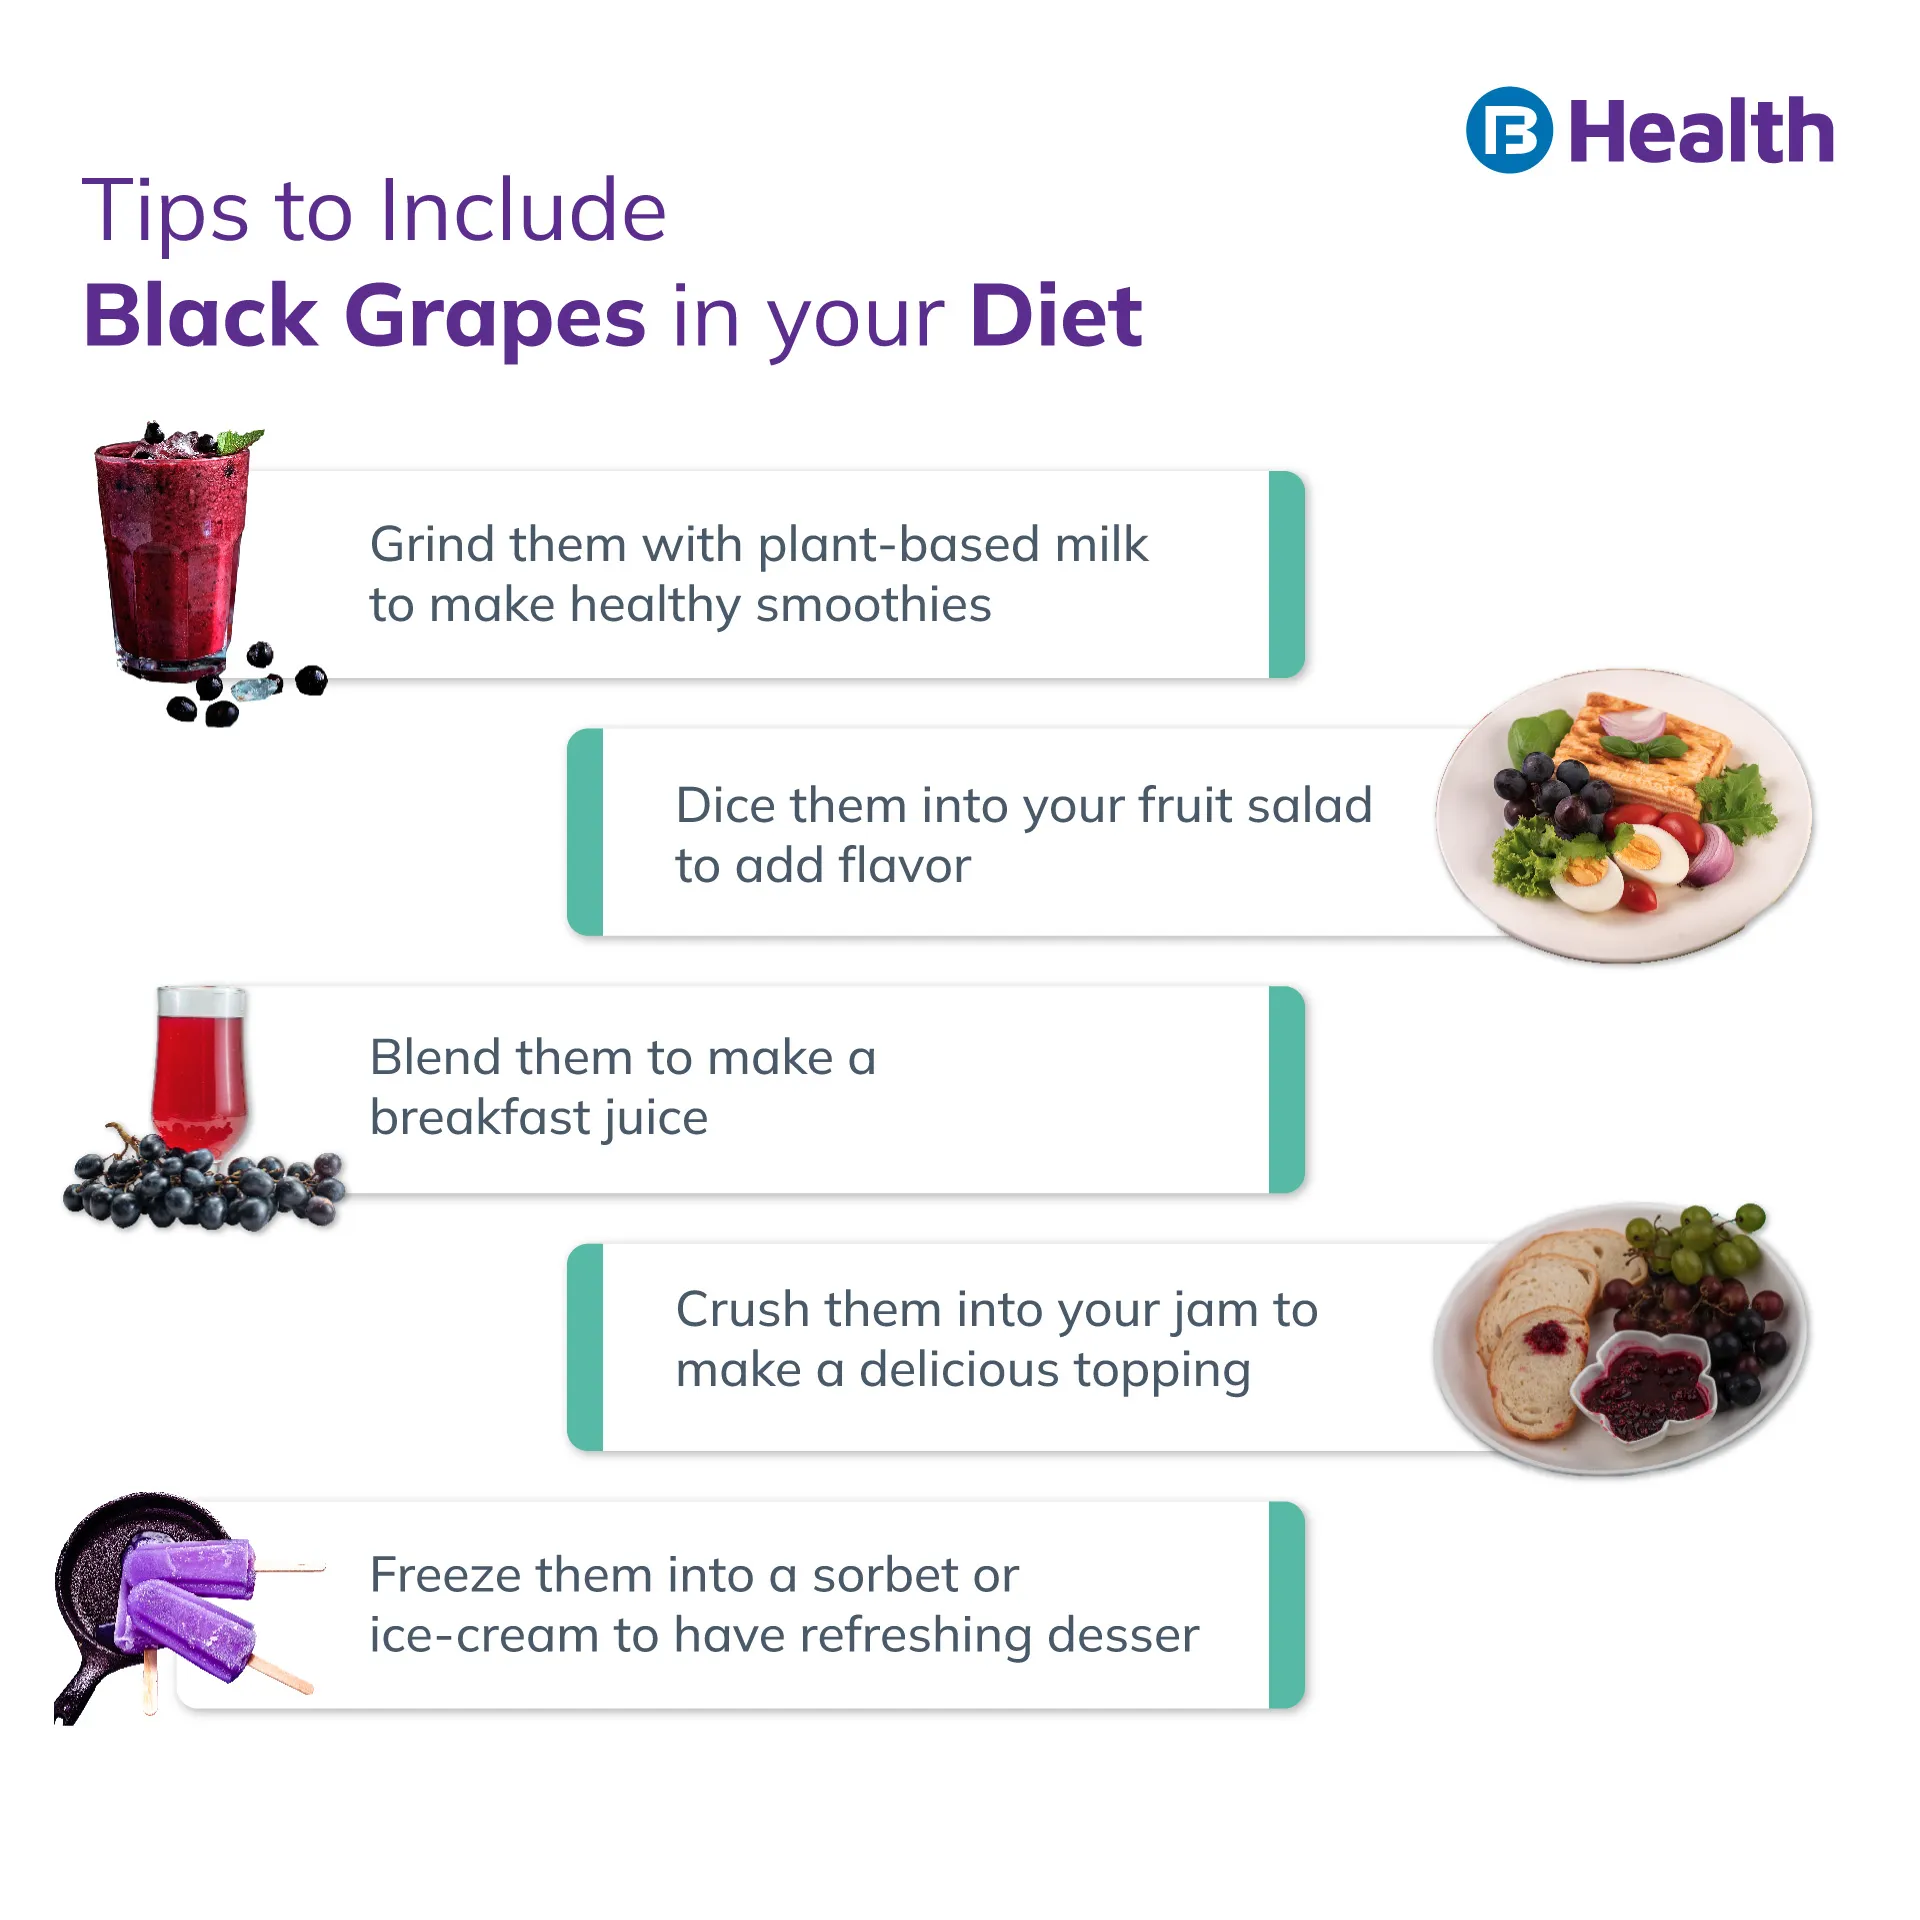 ways to include Black Grapes in diet